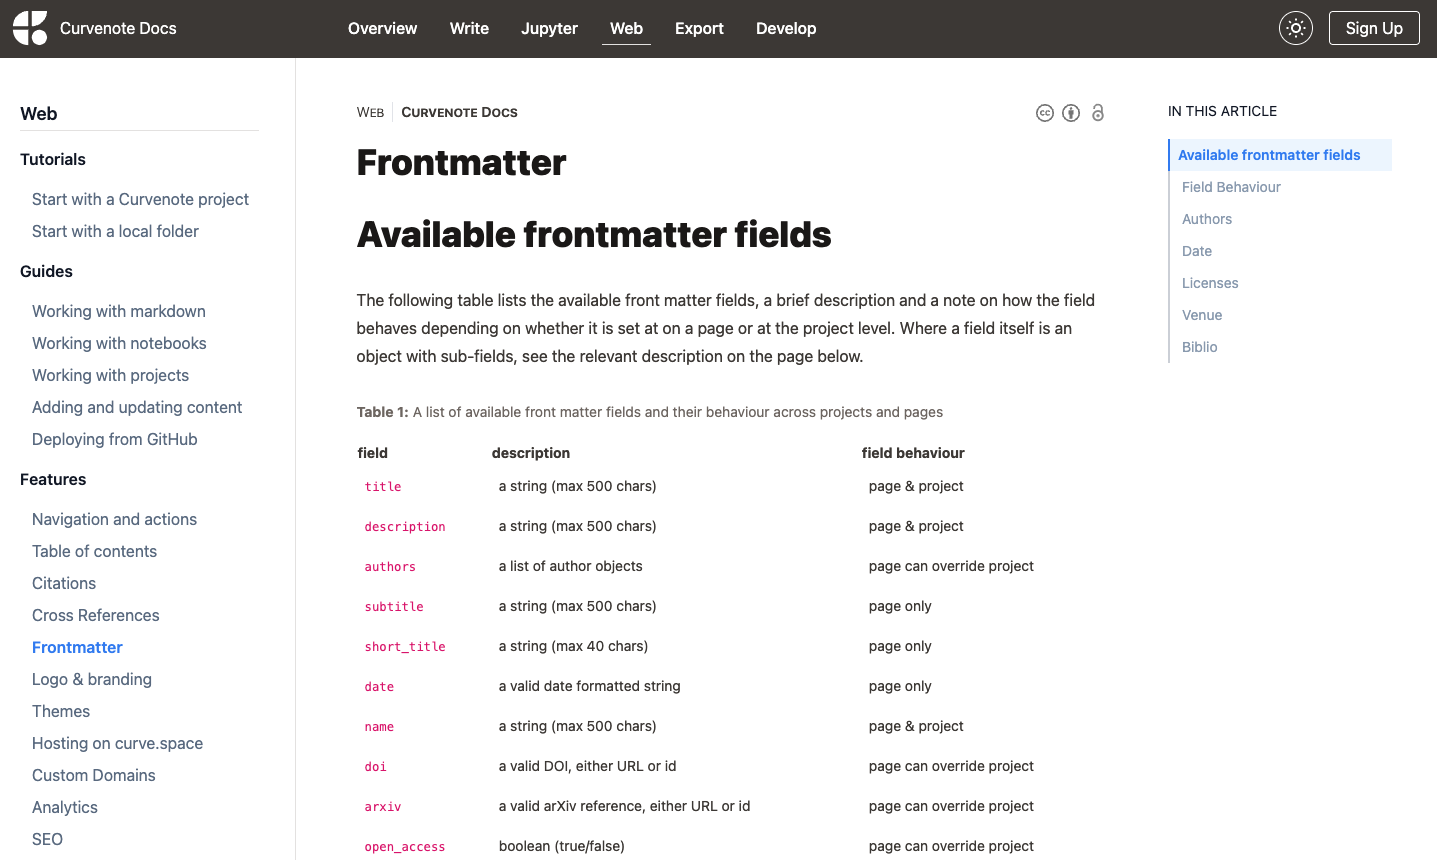 Documentation on frontmatter that you can add to your site.